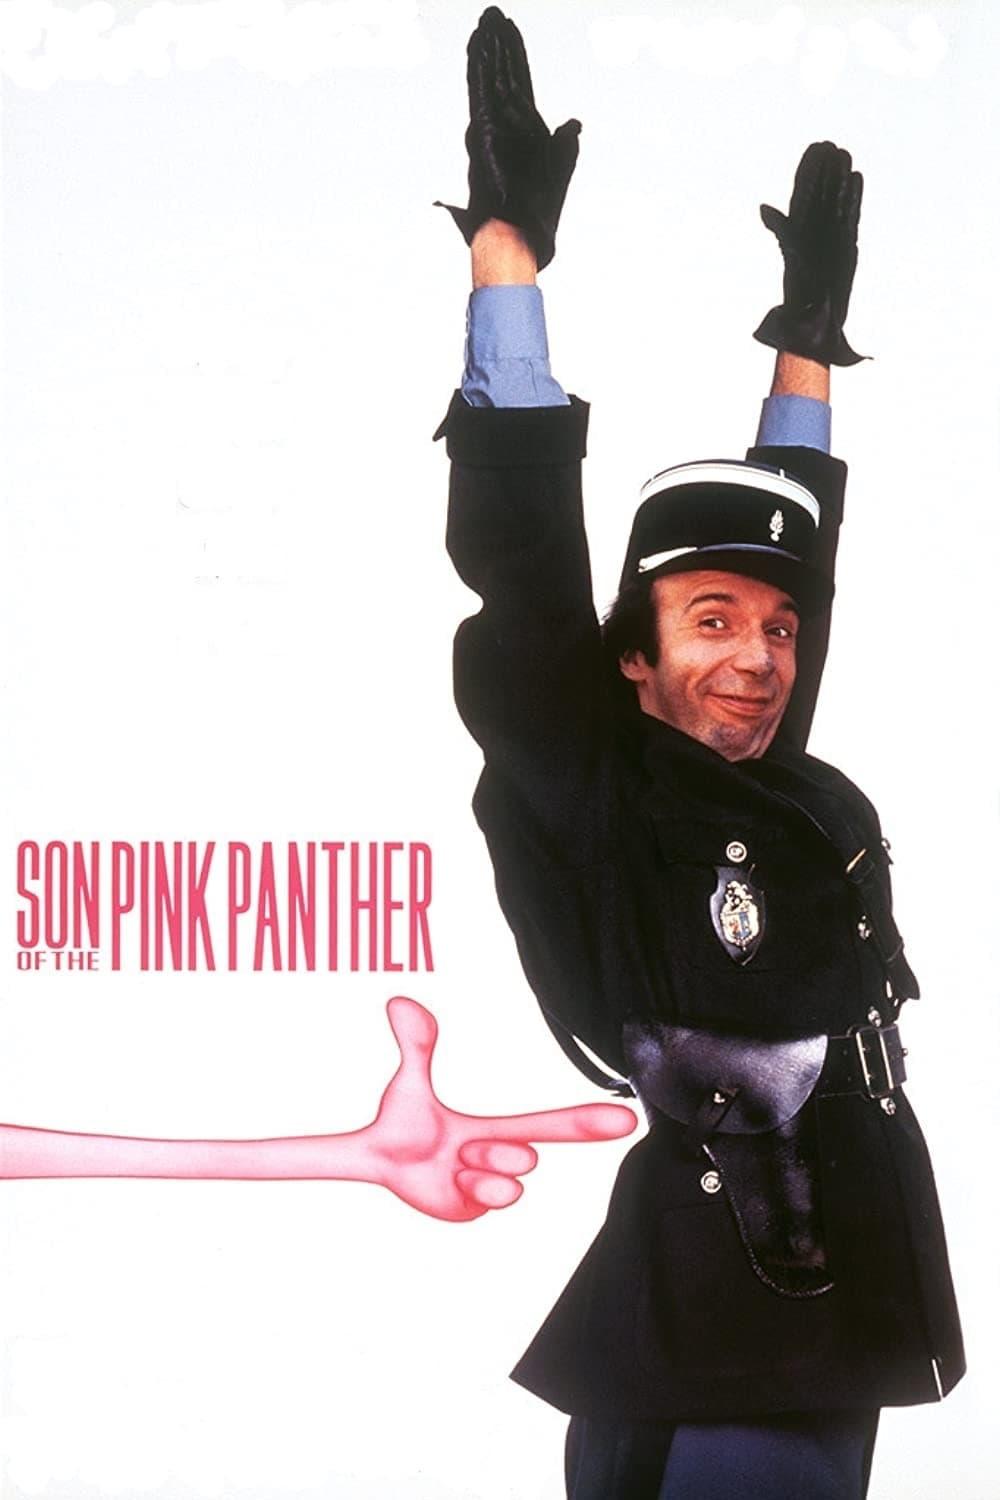 Son of the Pink Panther poster